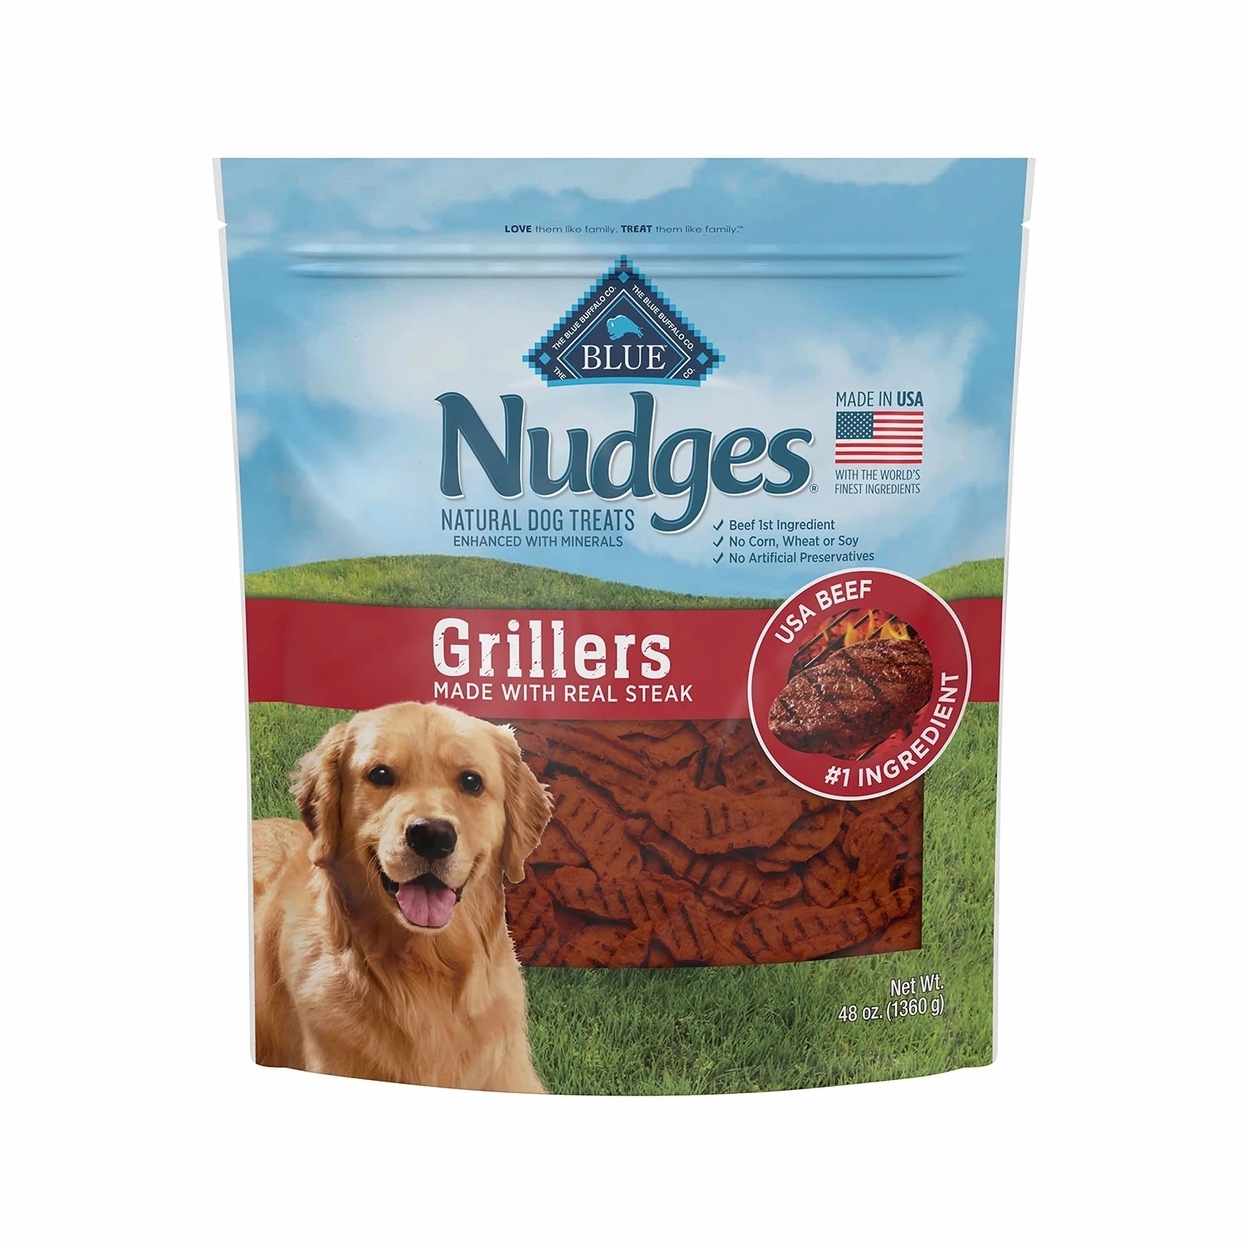 Blue Buffalo Nudges Grillers Natural Dog Treats, Steak Flavored (48 Ounce)